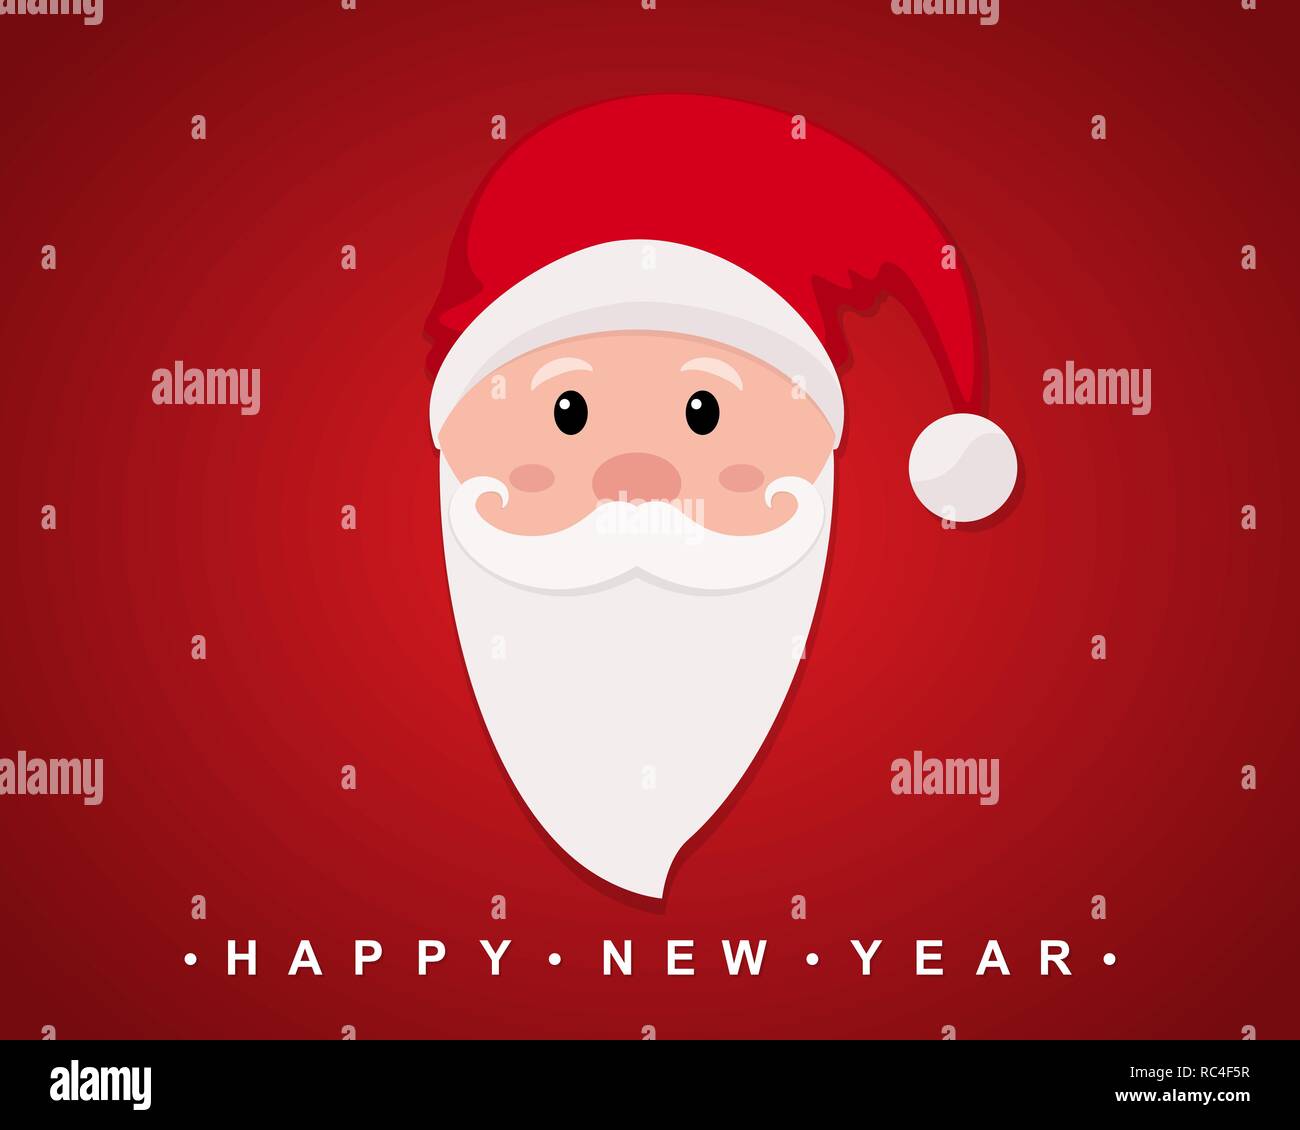 The face of Santa Claus with a beard and mustache on red background. Vector illustration. Happy New Year icon. Stock Vector